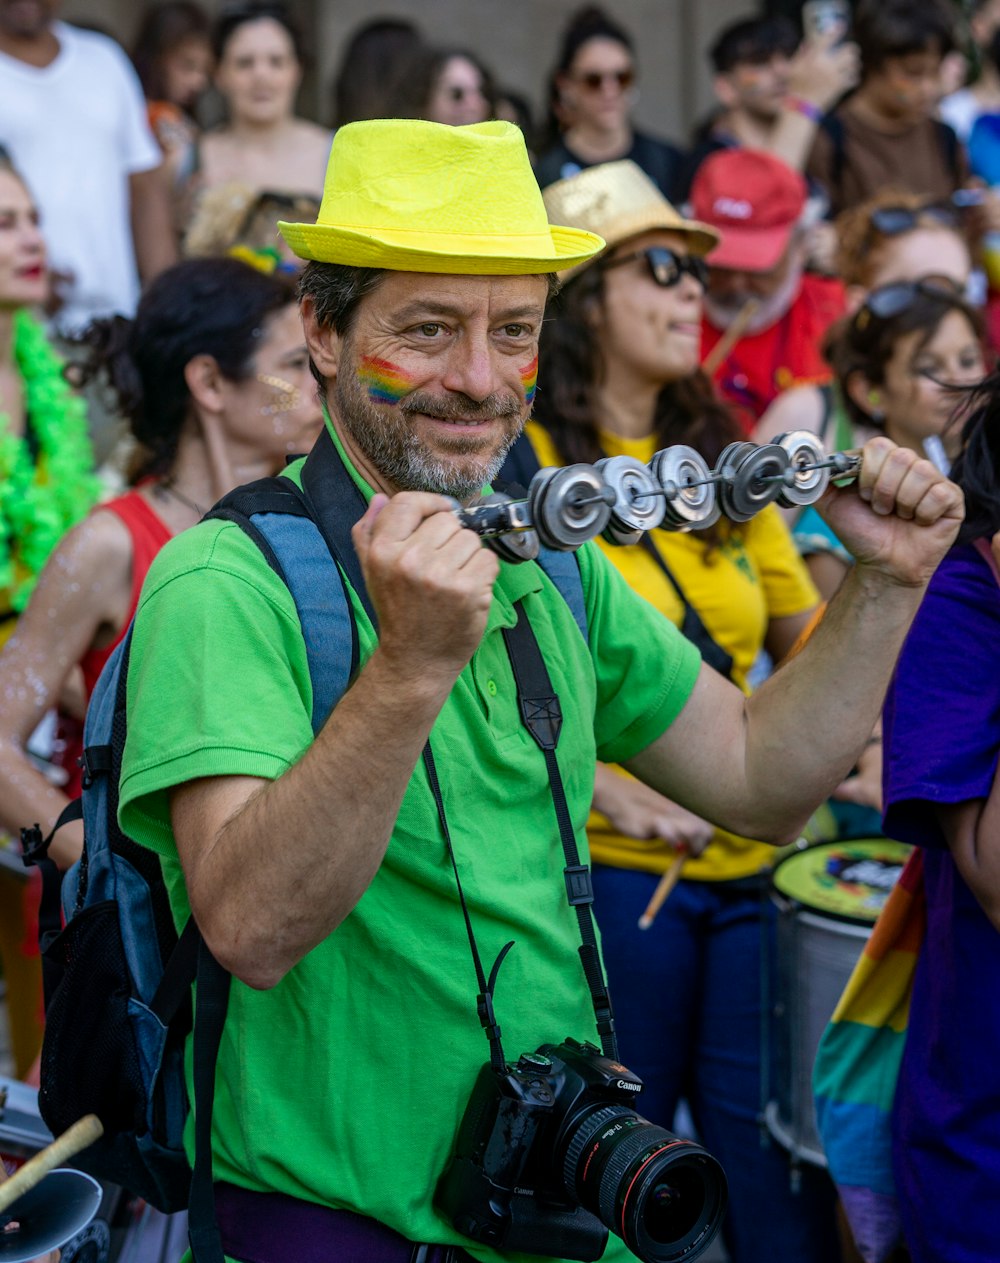 a man in a yellow hat is holding a camera